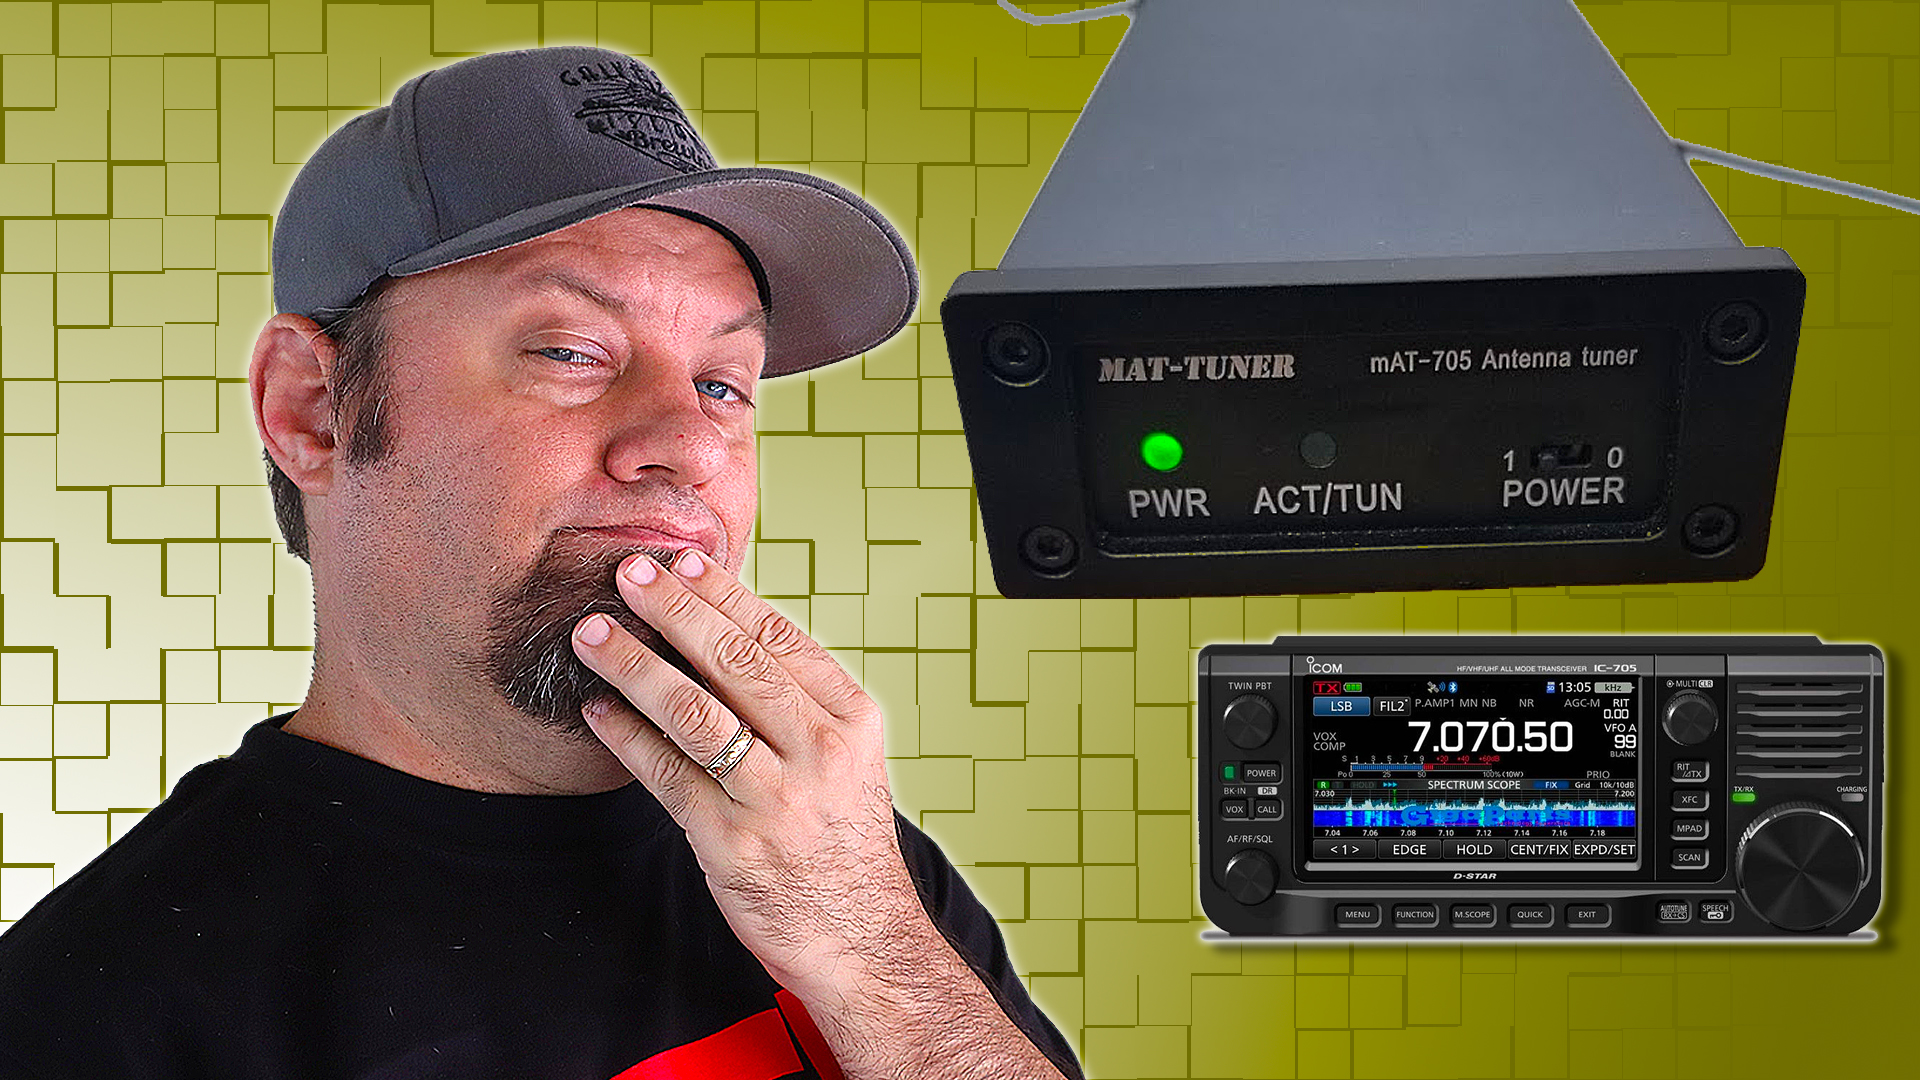 Episode 537: Icom IC-705 with the mAT-705 Portable Tuner | IC-705 Accessories